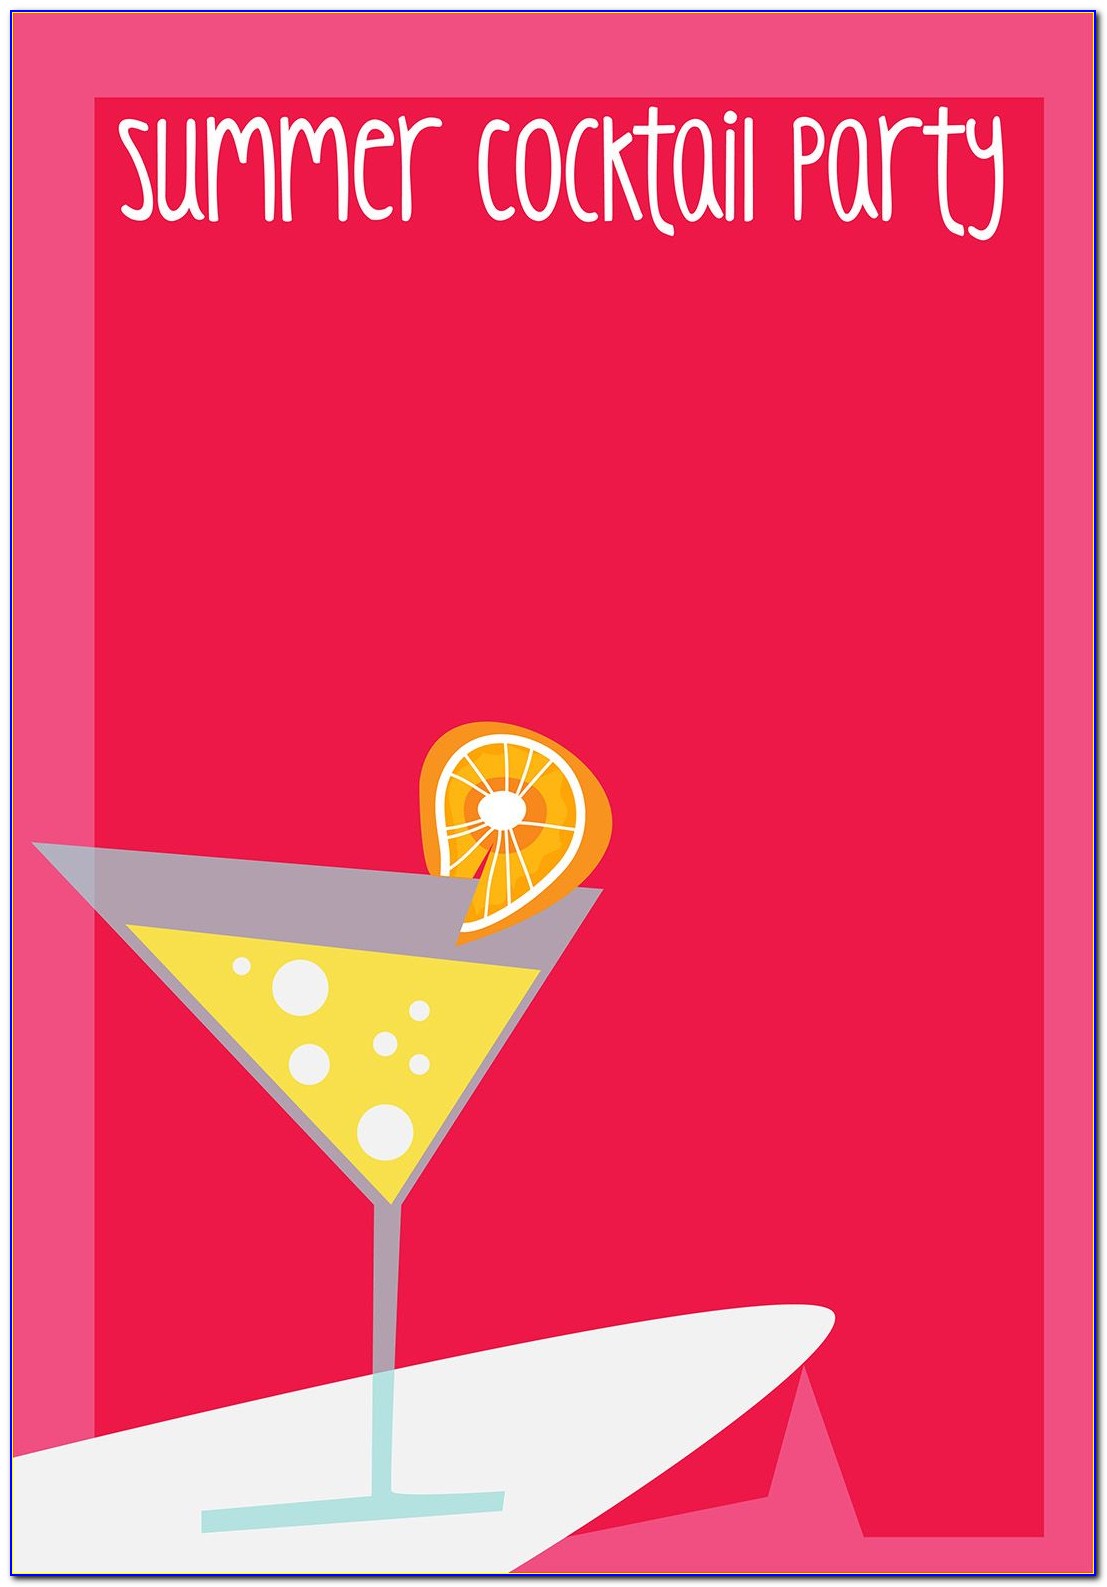 Cocktail Party Invitation Card Template